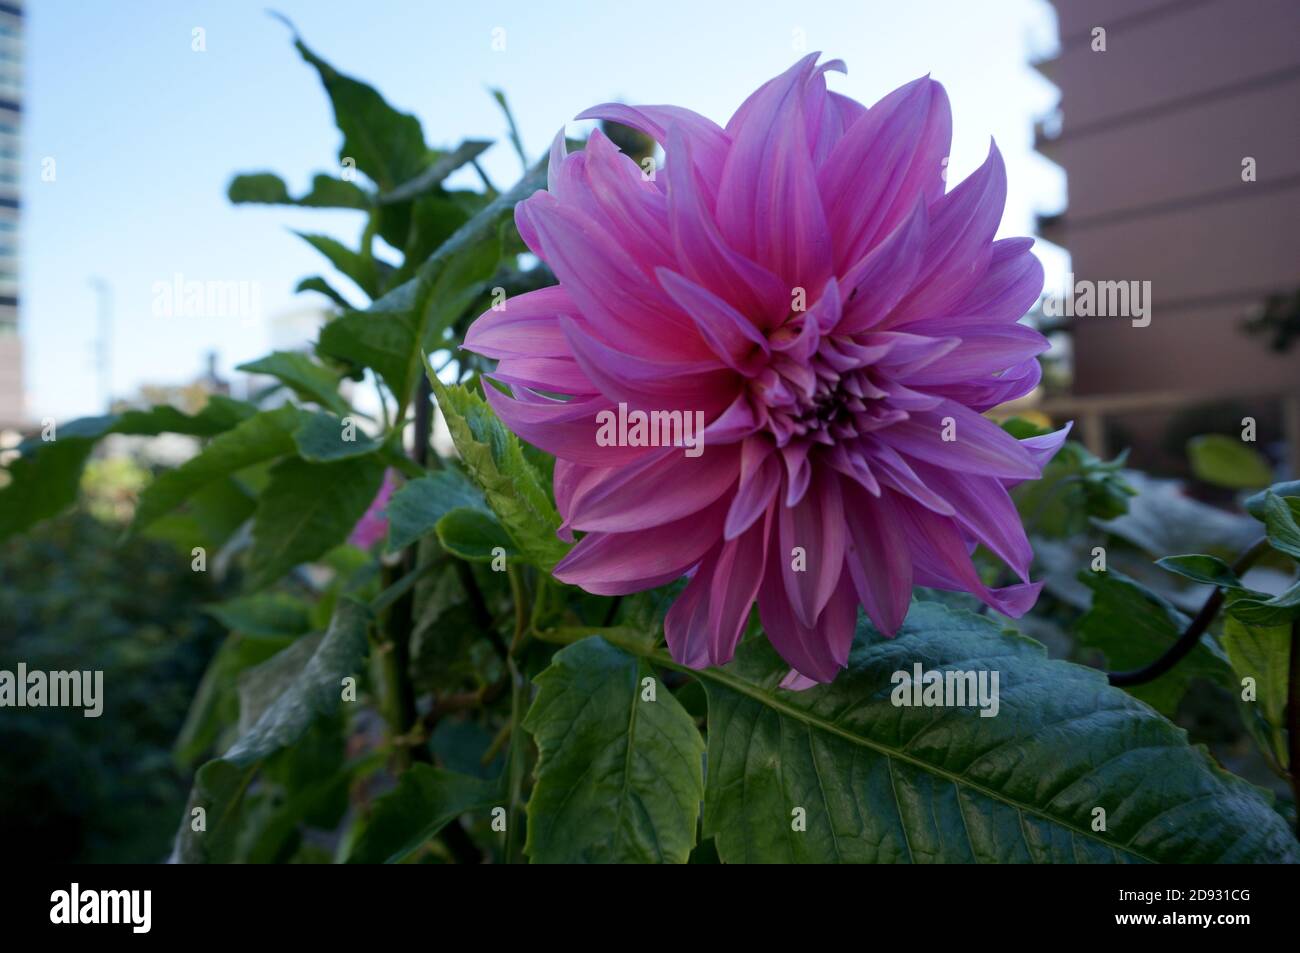 Dahlia 'Lavender Perfection' in Garden. Dahlia is a genus of bushy, tuberous, herbaceous perennial plants native to Mexico and Central America. A memb Stock Photo